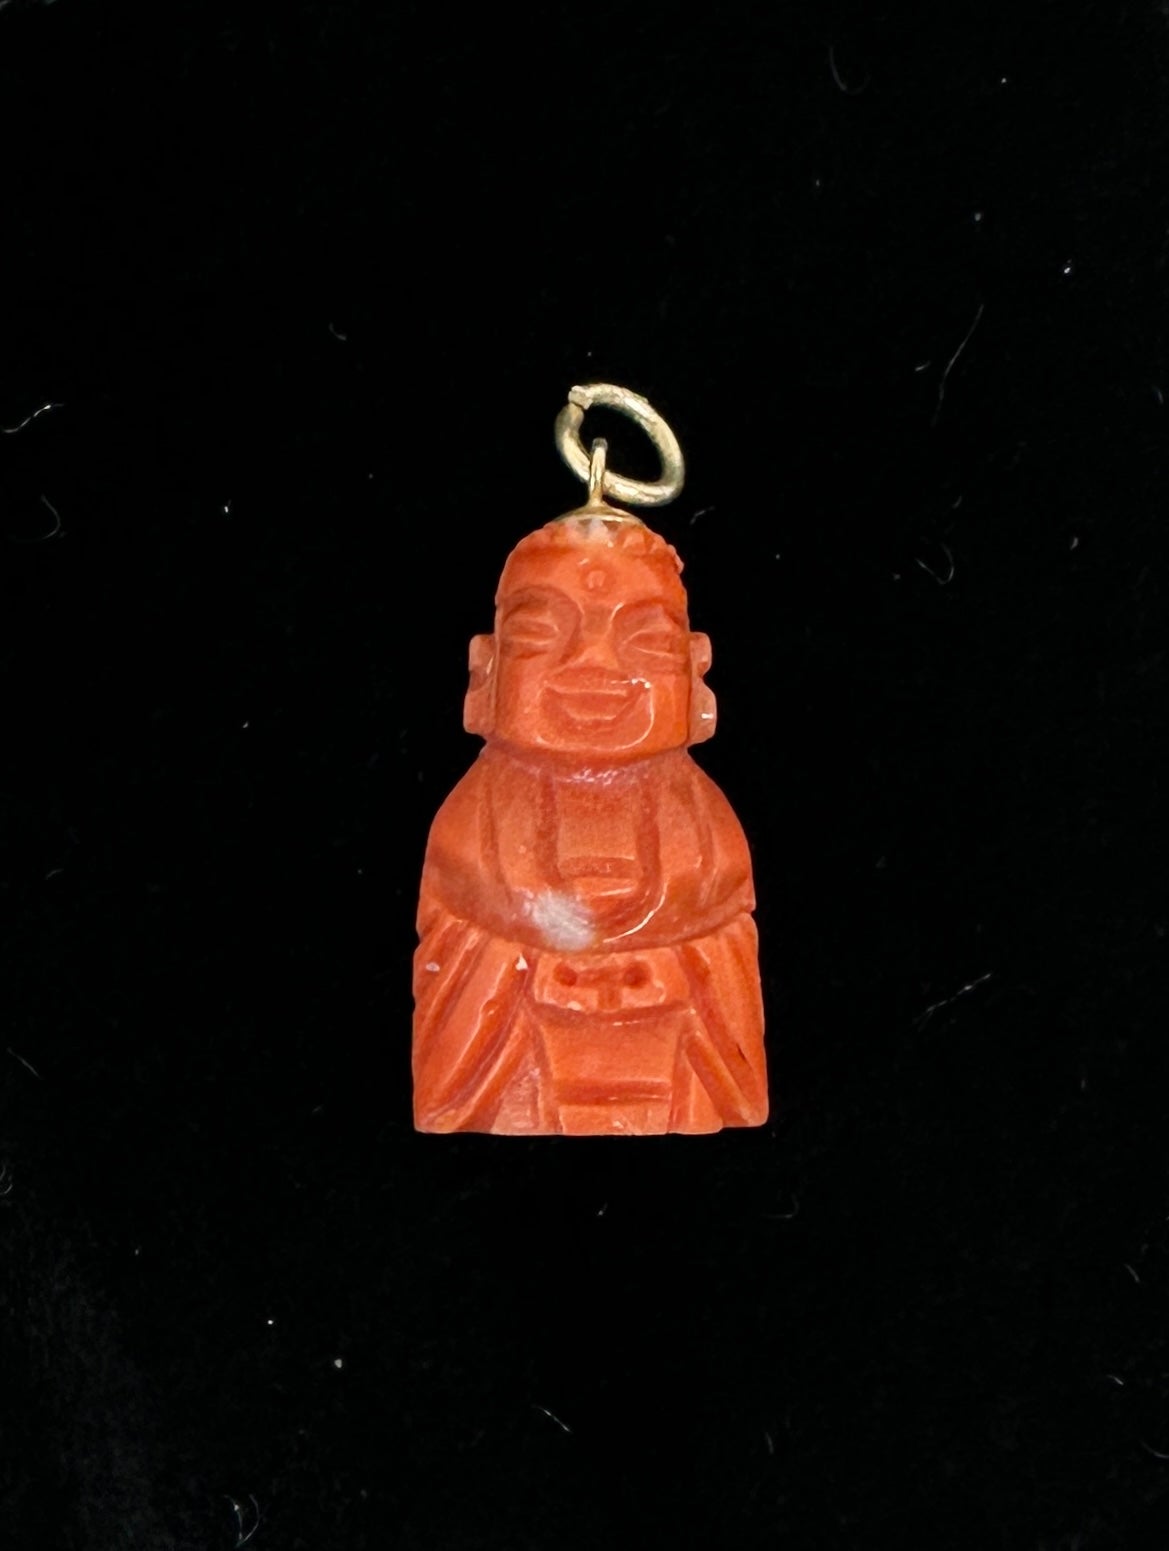 This is a wonderful antique Art Deco Coral Buddha Pendant or Charm in 14 Karat Yellow Gold.  The Buddha is exquisitely carved in natural Momo Coral.  The Buddha miniature is a beautiful creation with wonderful details in the face, hair and robes in